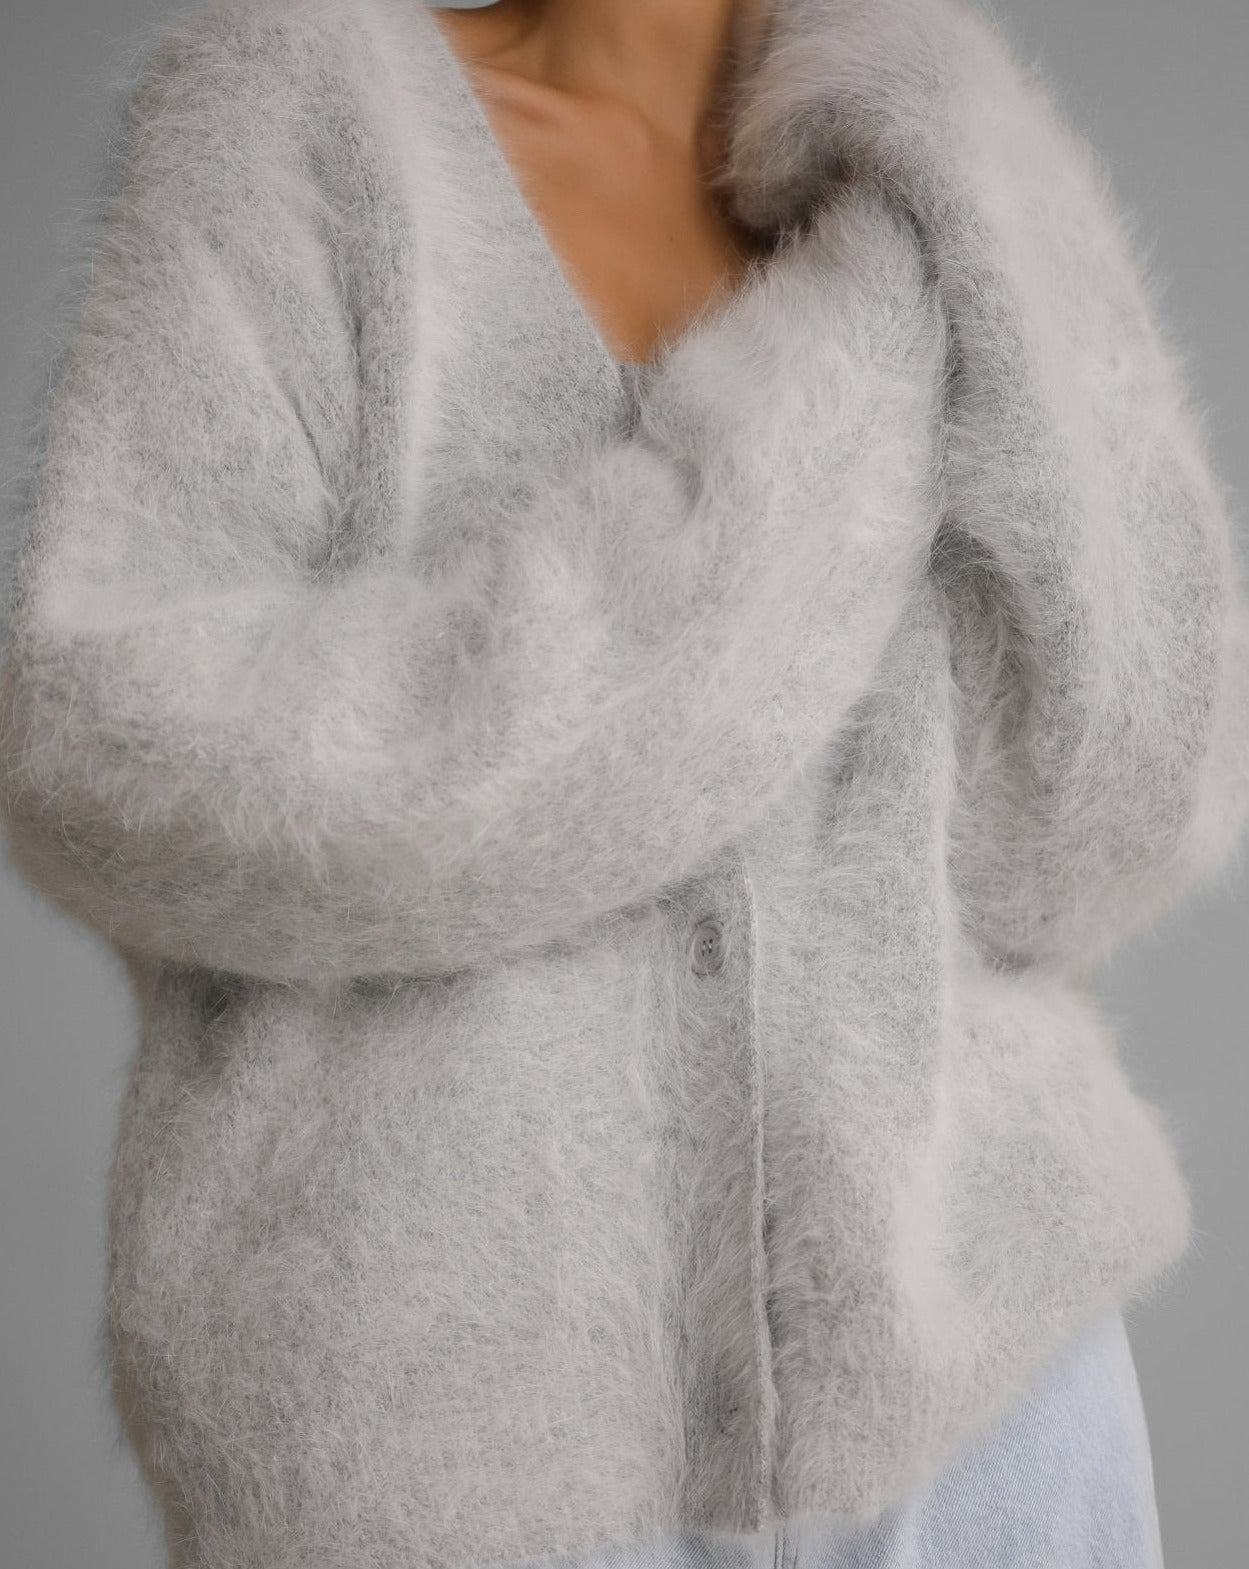 [Ready to ship] [PAPERMOON] AW/LUX Mink Angora Oversized Knit Cardigan